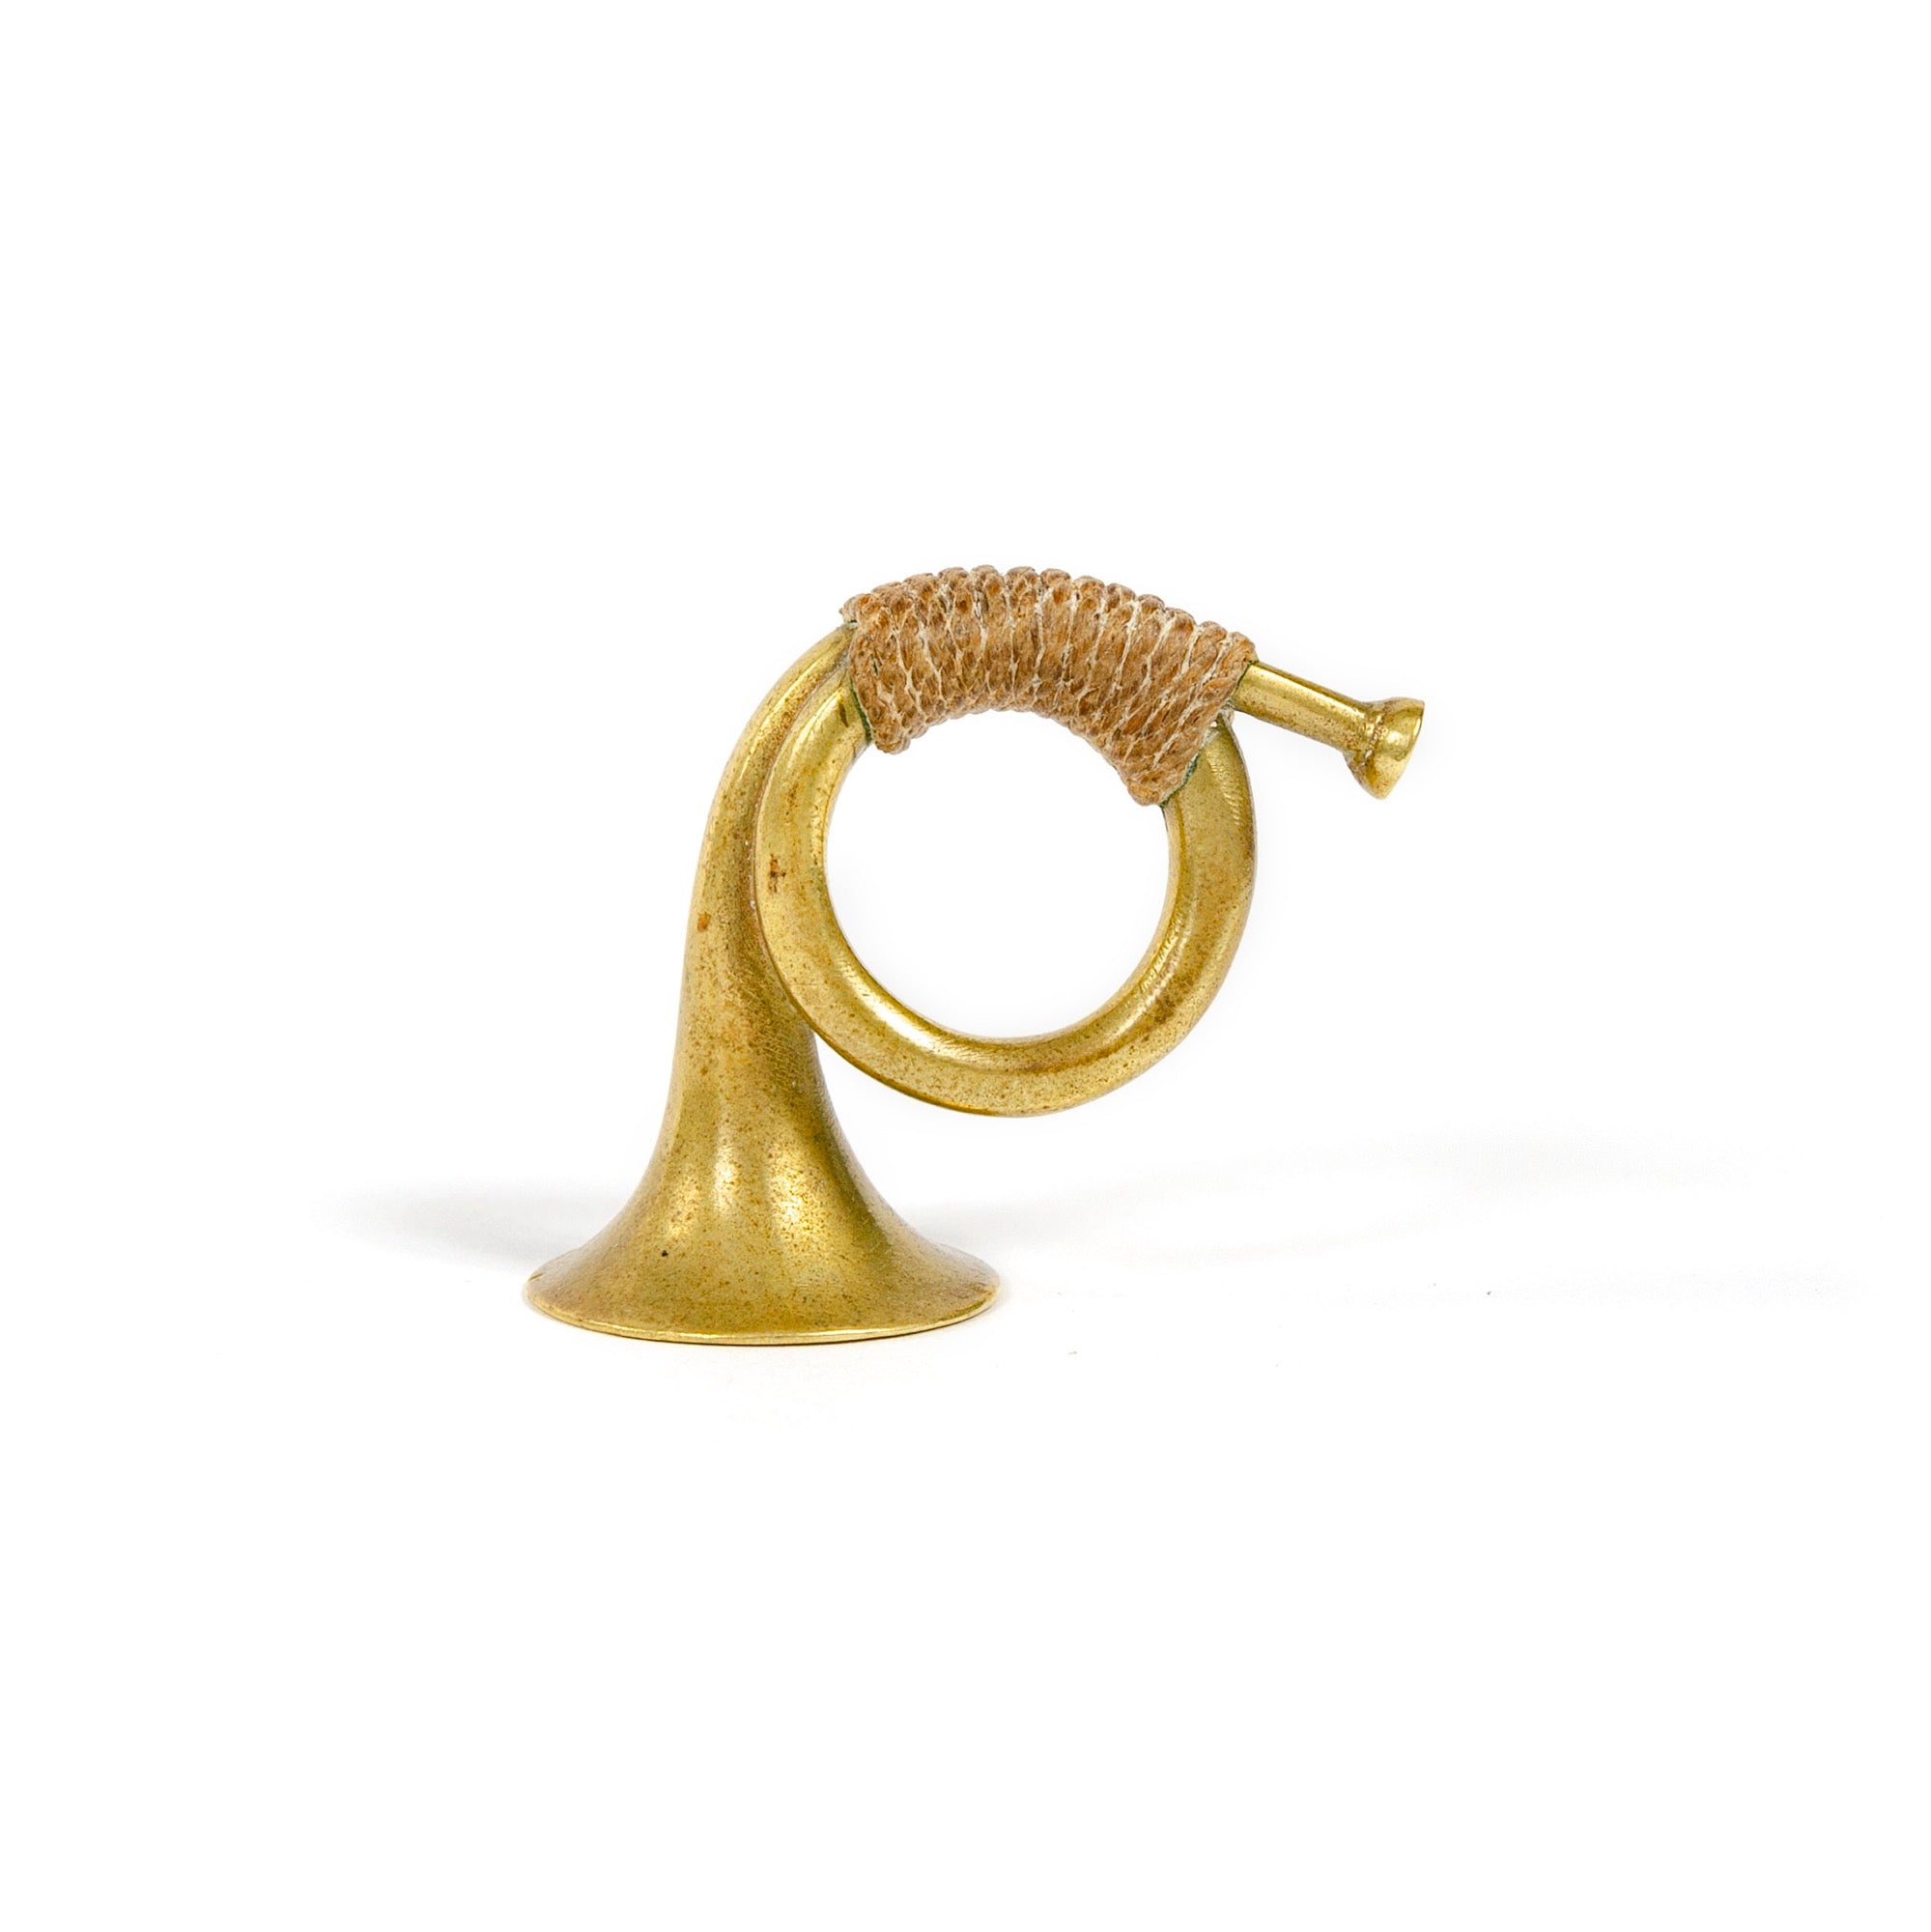 French Horn Tamper by Carl Aubock